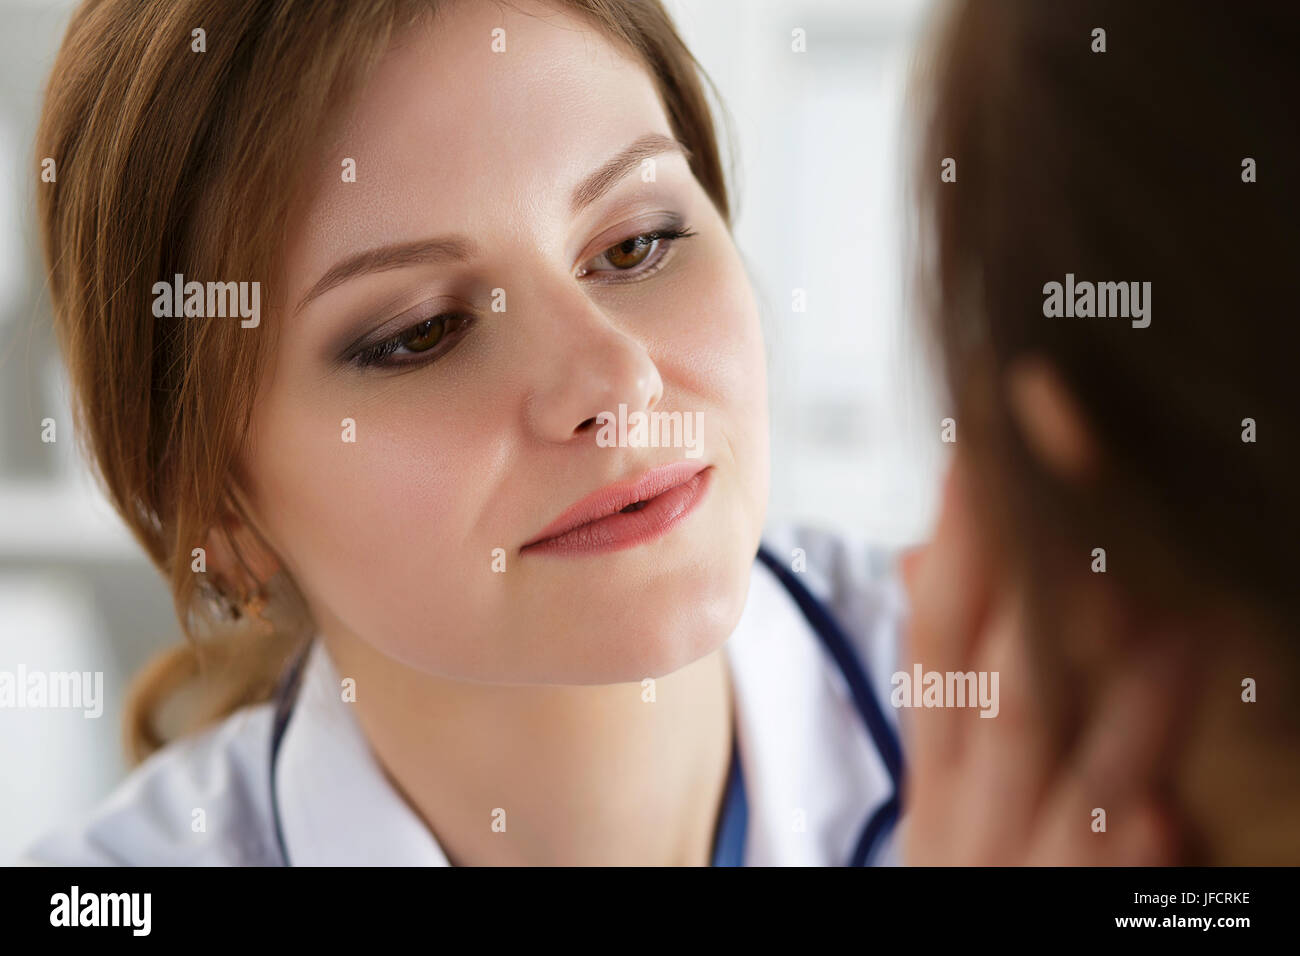 Female medicine doctor examining patient. Healthcare, medical service and insurance concept. Dermatologist or ENT examination. Stock Photo